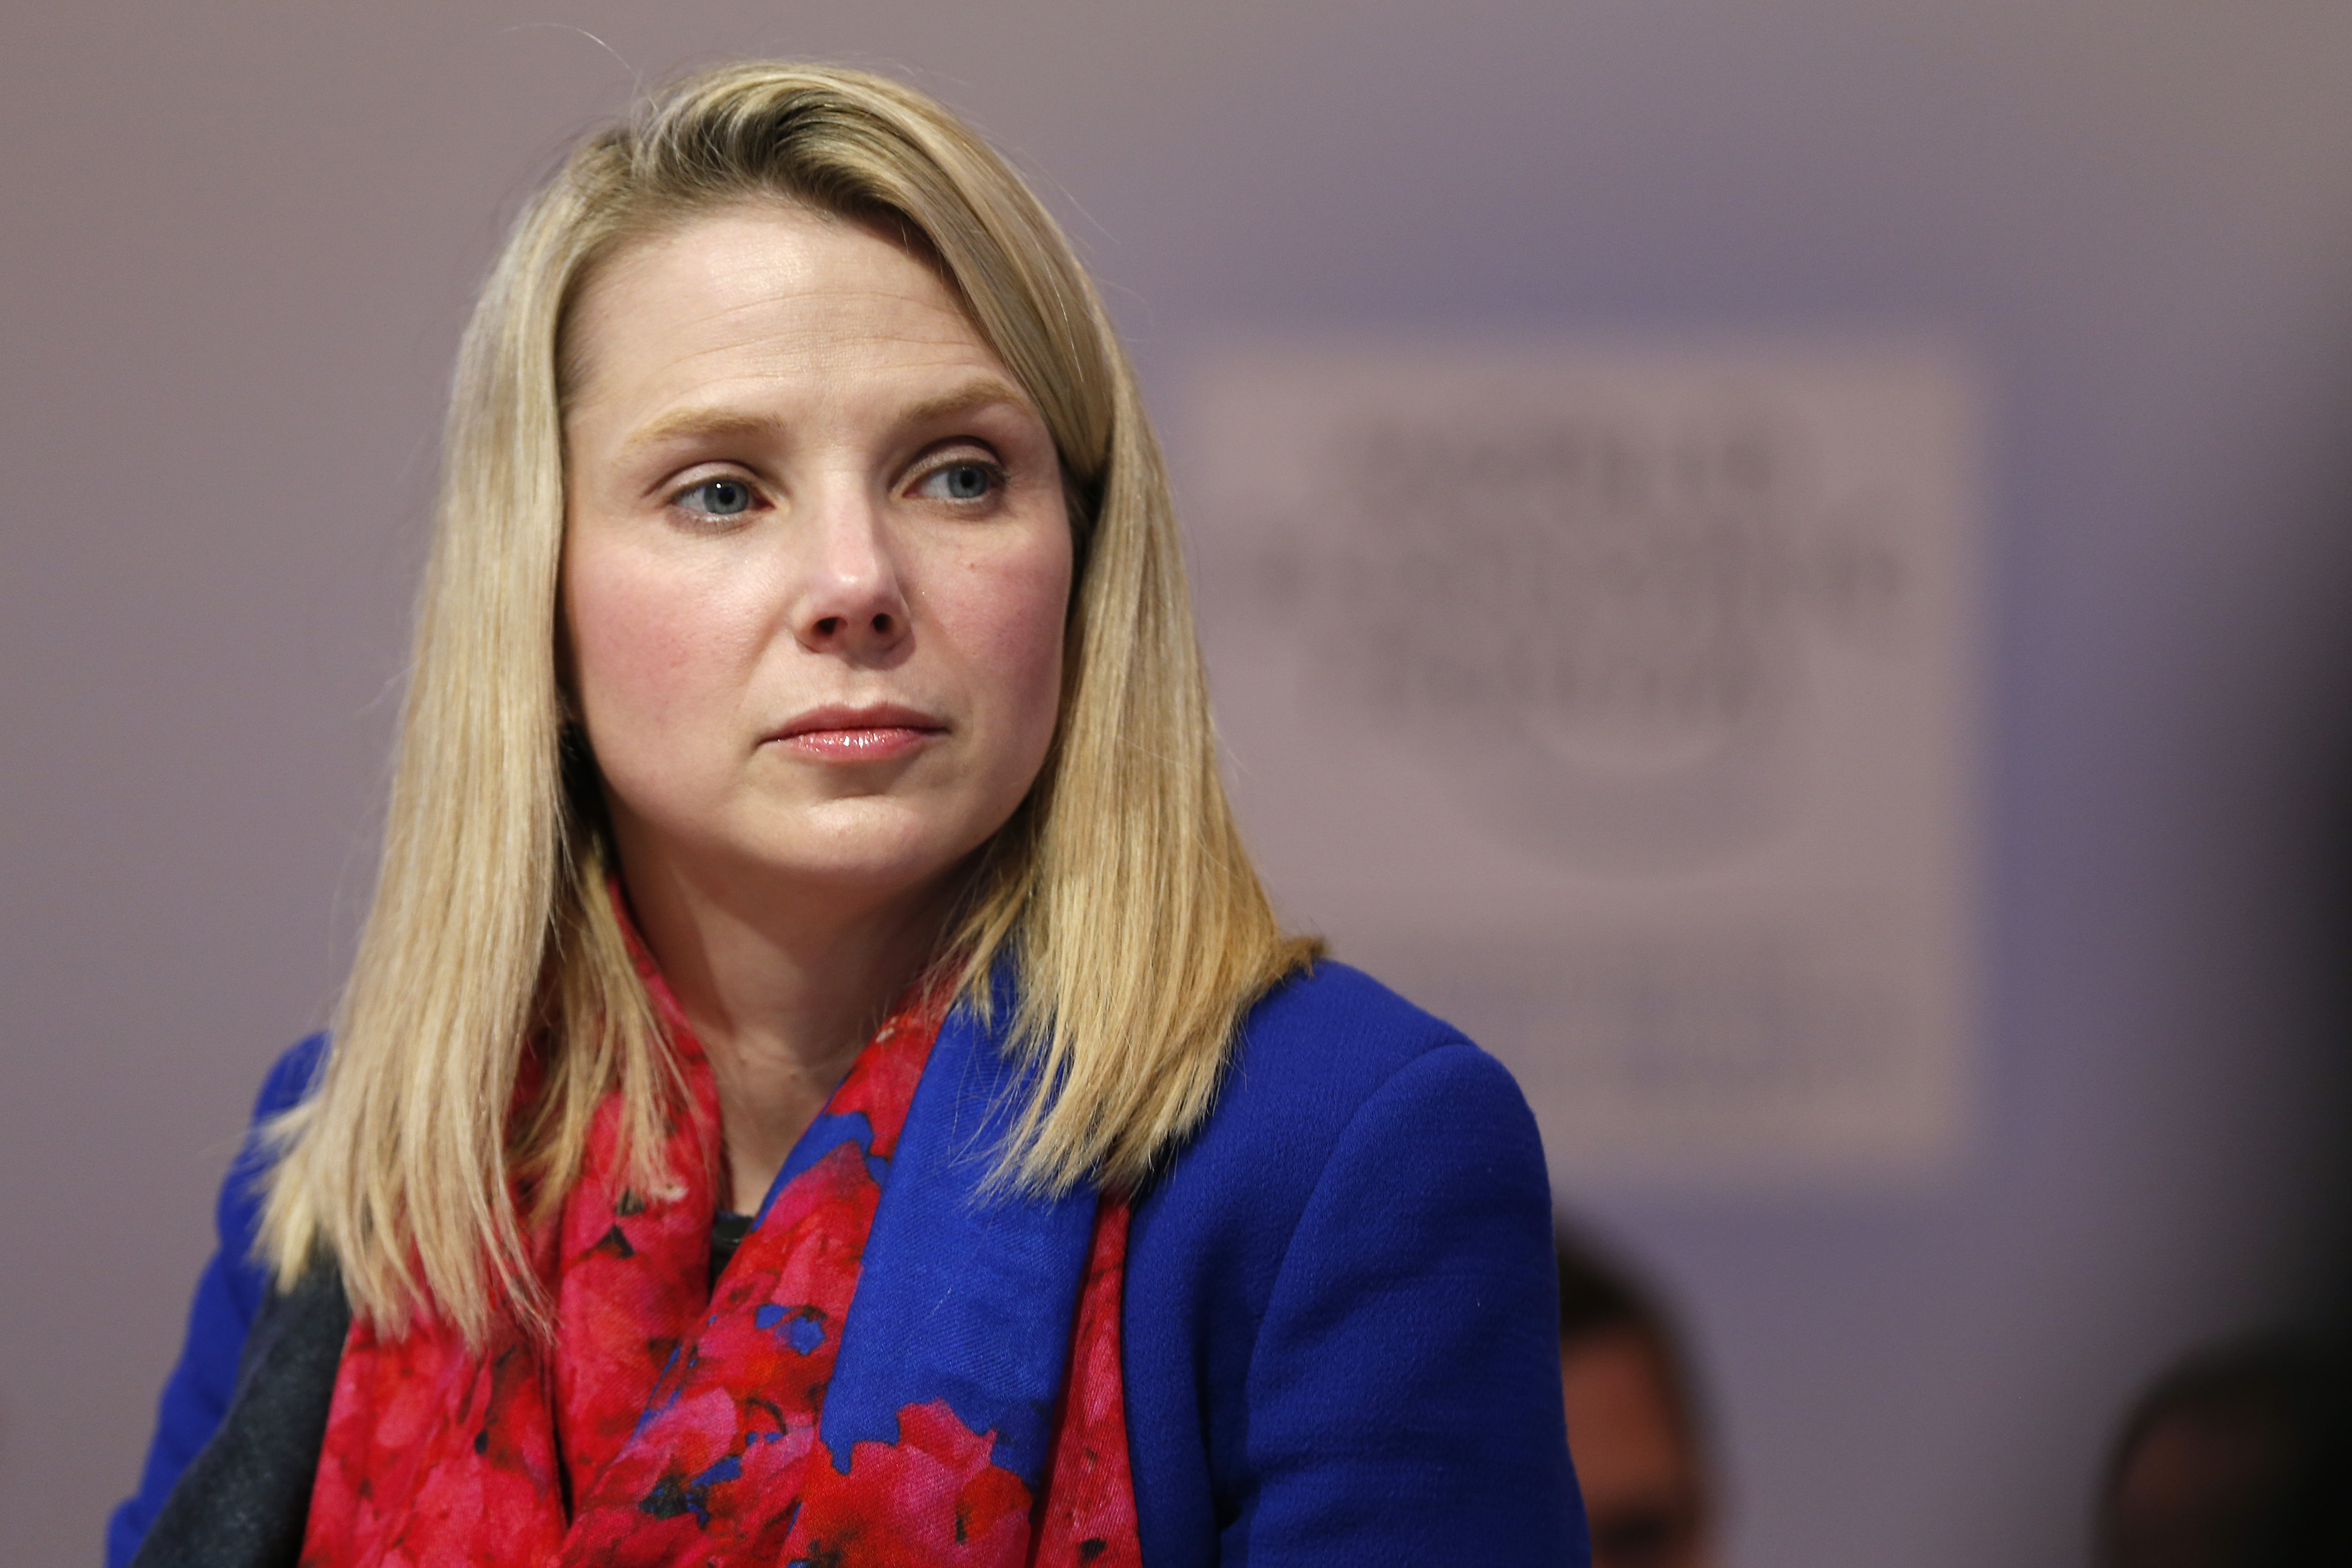 Marissa Mayer, chief executive officer of Yahoo! Inc., pauses during a session on day two of the World Economic Forum (WEF) in Davos, Switzerland, on Thursday, Jan. 22, 2015. (Jason Alden—Bloomberg/Getty Images)